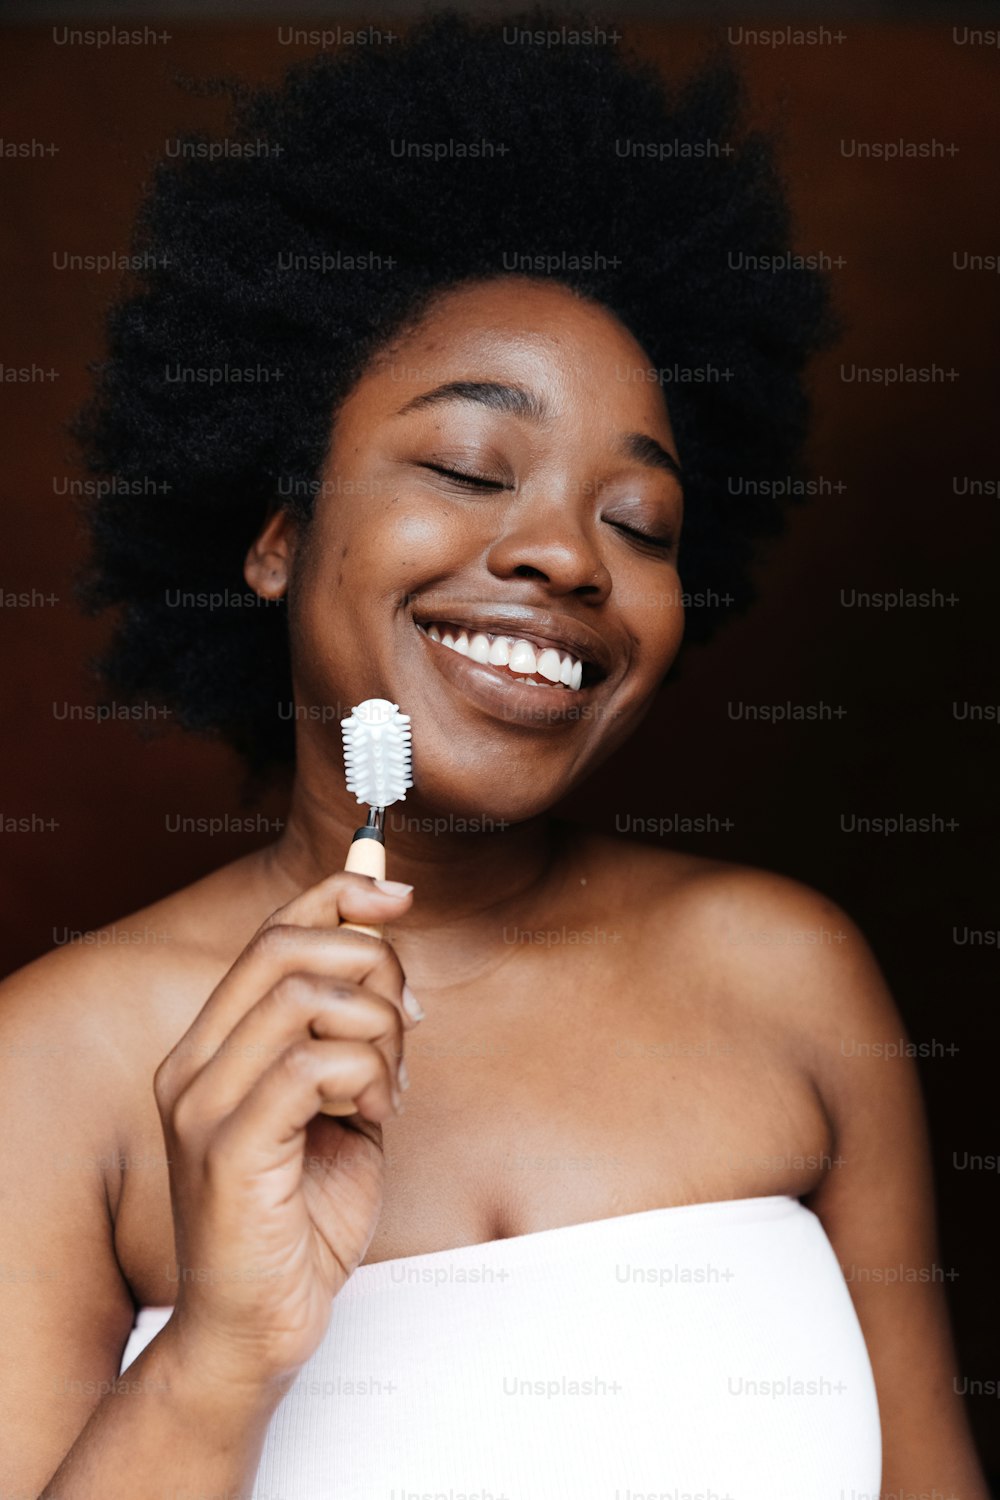 a woman smiles while holding a toothbrush